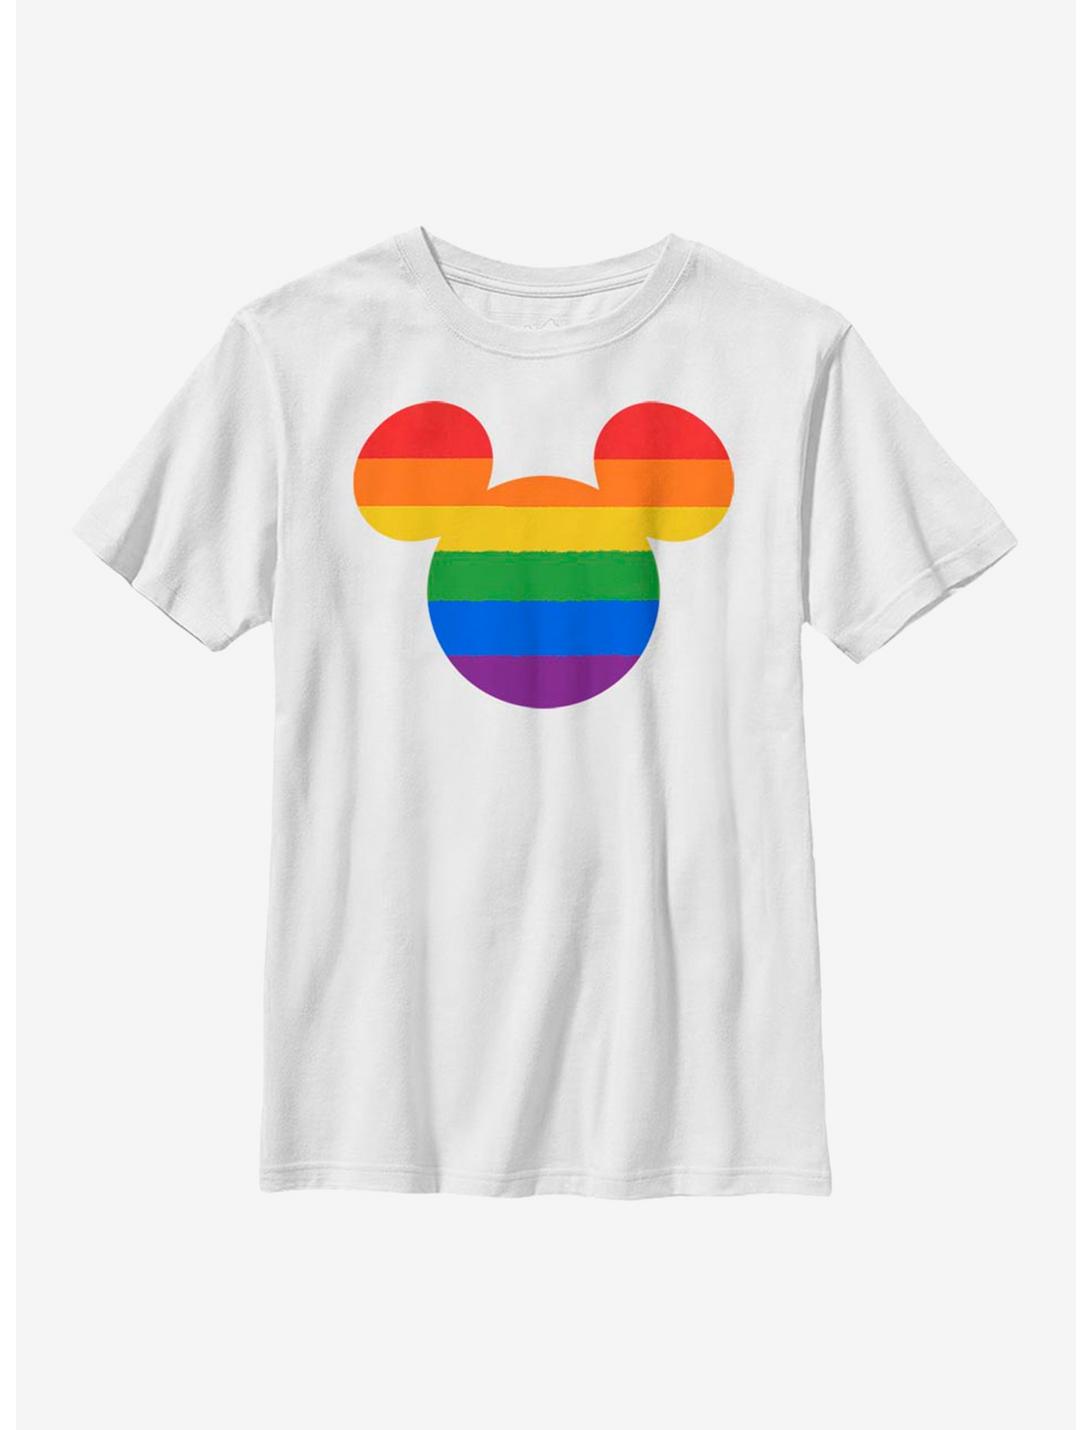 Disney Mickey Mouse Rainbow Ears Youth T-Shirt, WHITE, hi-res